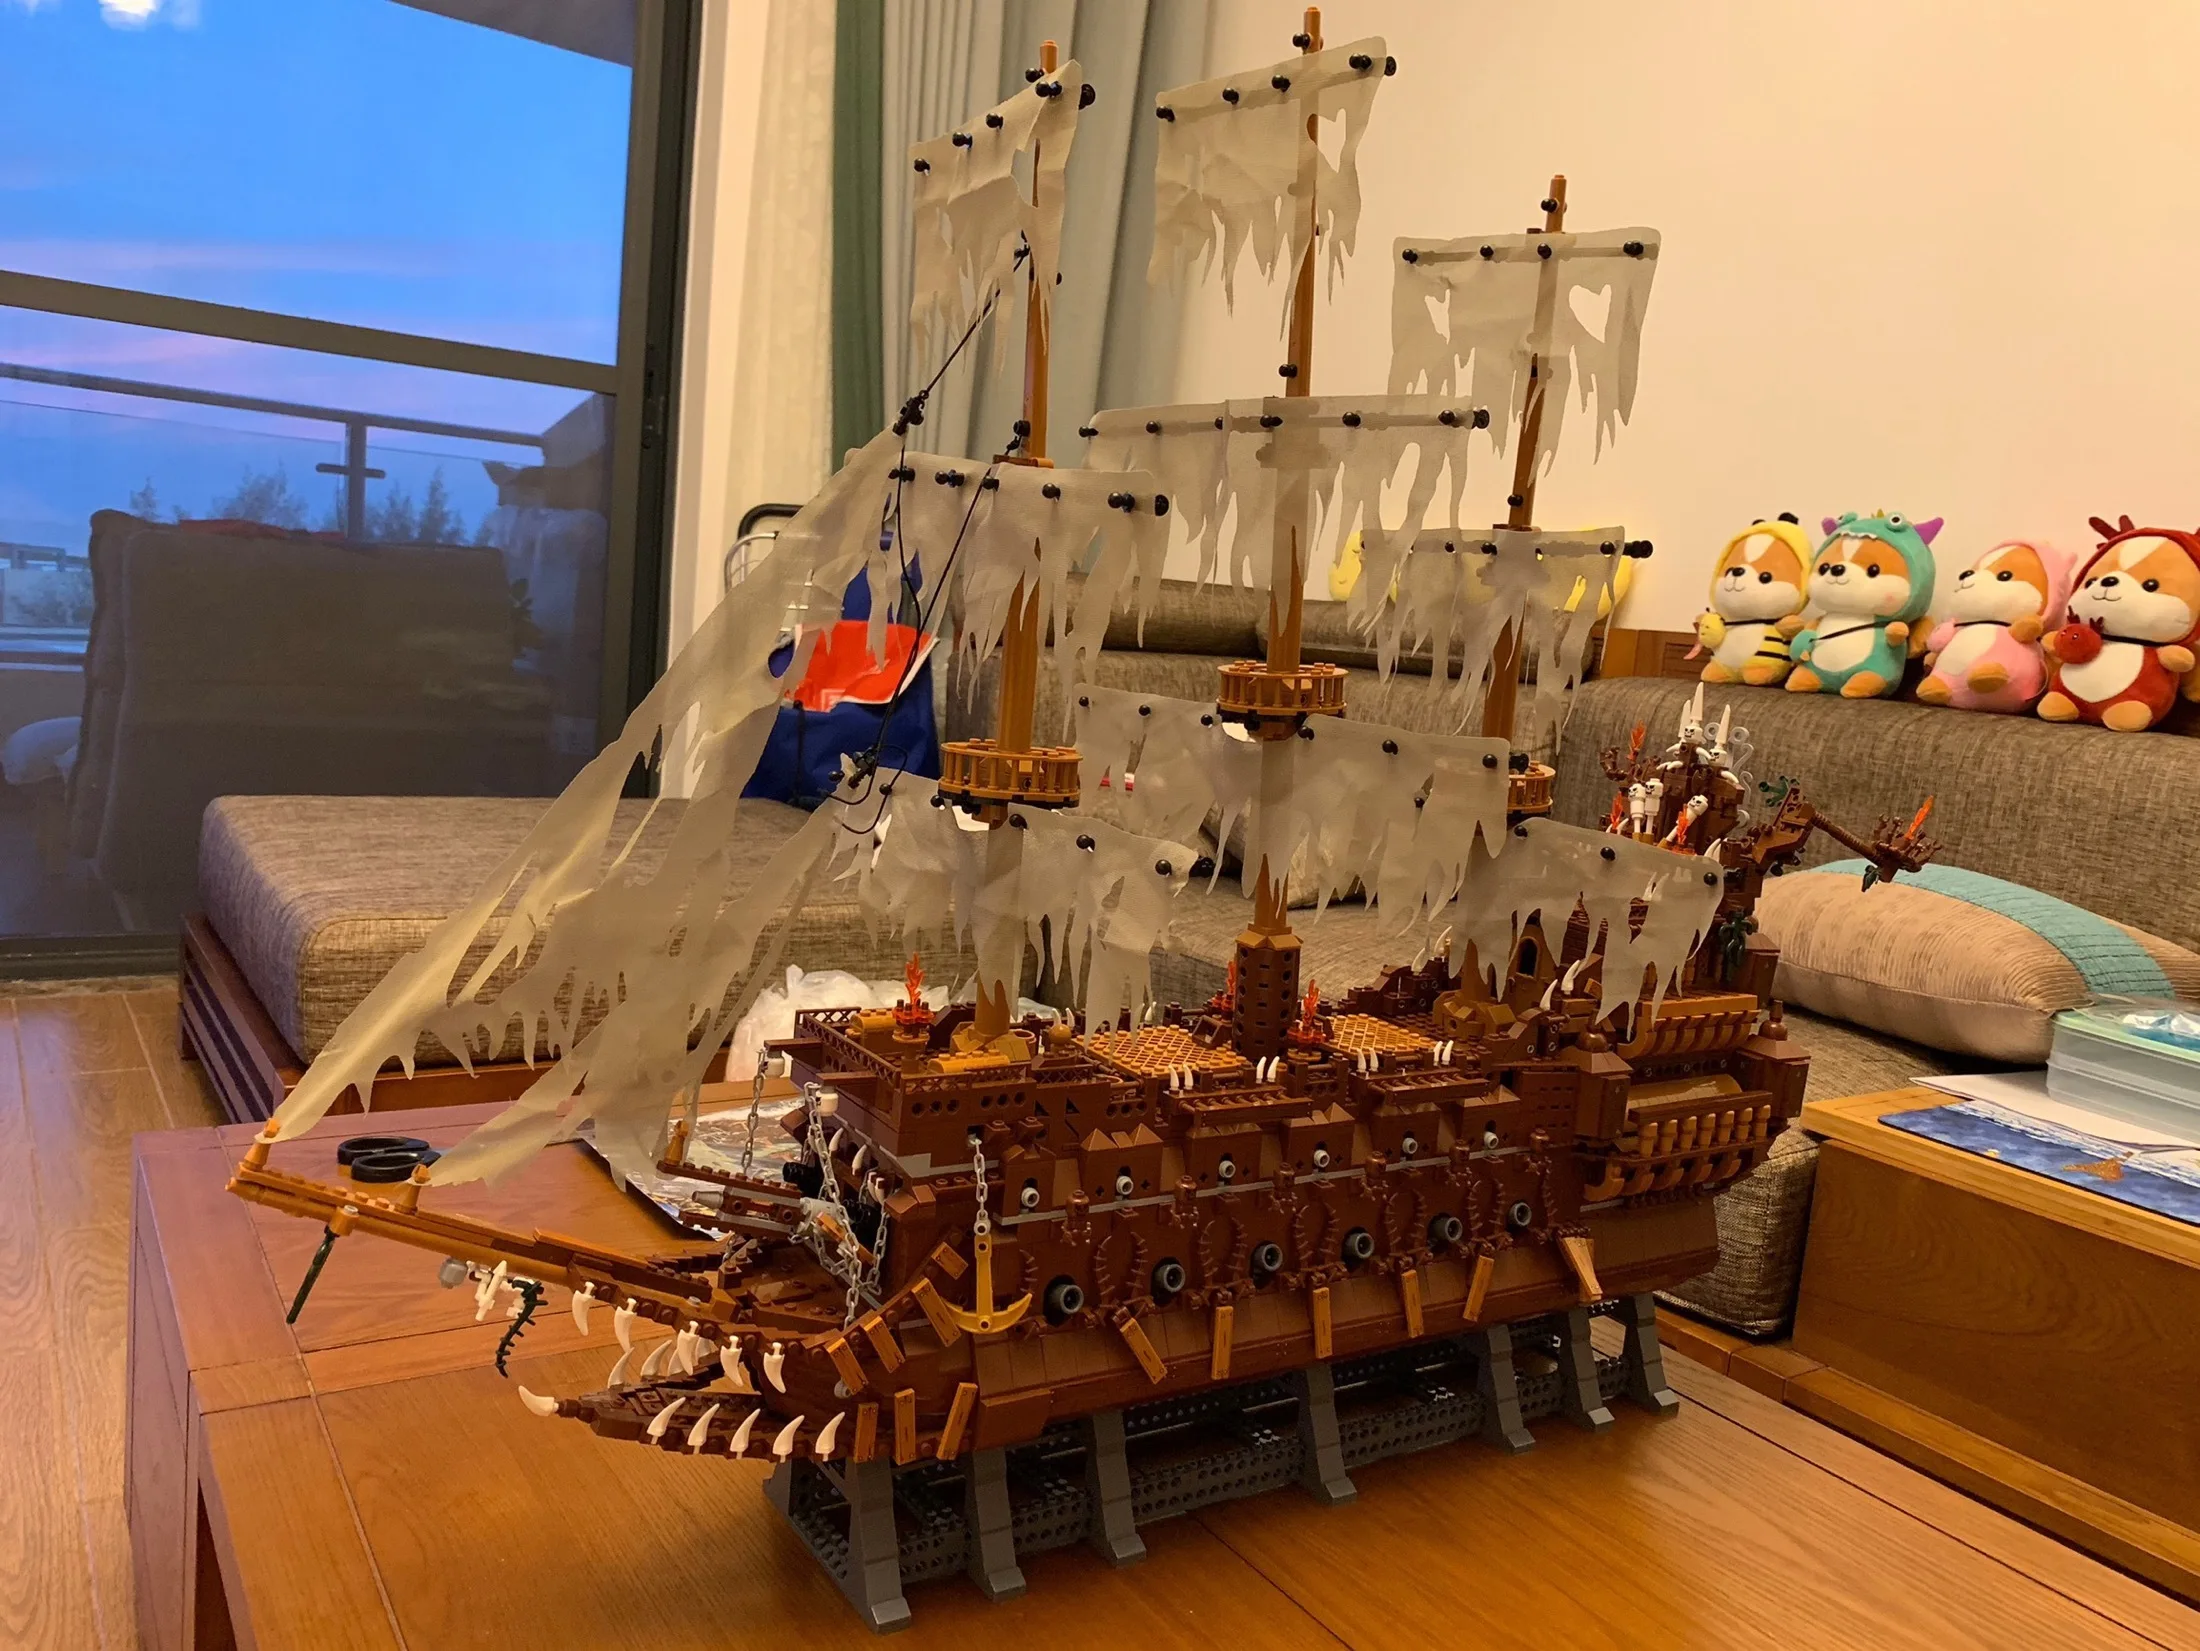 

16016 3652PCS MOC Movies Series The Flying Dutchman Netherlands Ship Pirate Building Blocks Bricks Educational Toys For Children